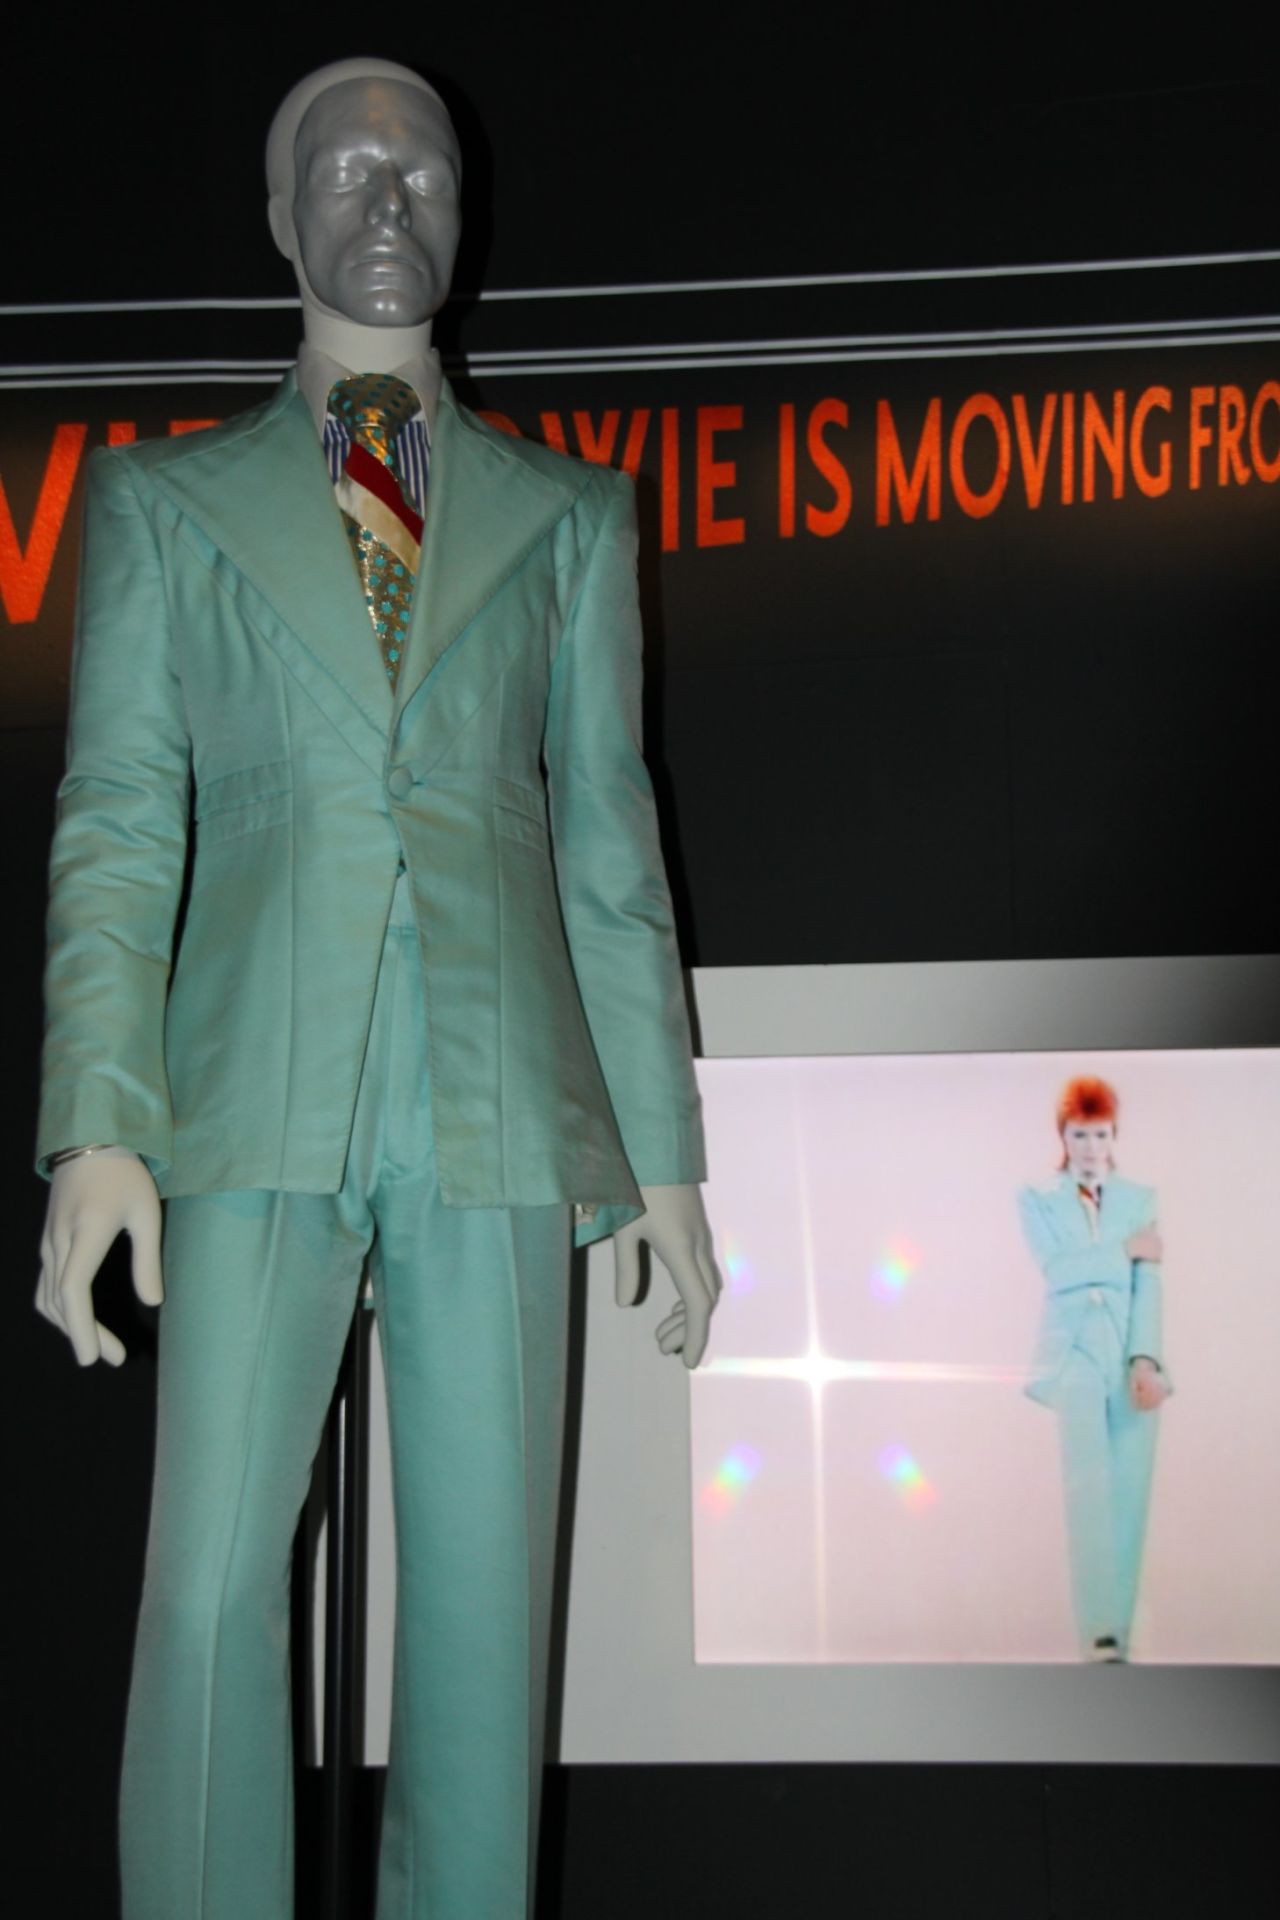 Bowie wore this ice blue suit by Freddie Burretti for the 1972 "Life on Mars" promotional film with Japanese eyeshadow applied by make-up artist Pierre Laroche. "For weeks my stage persona went all geisha," the singer said. 